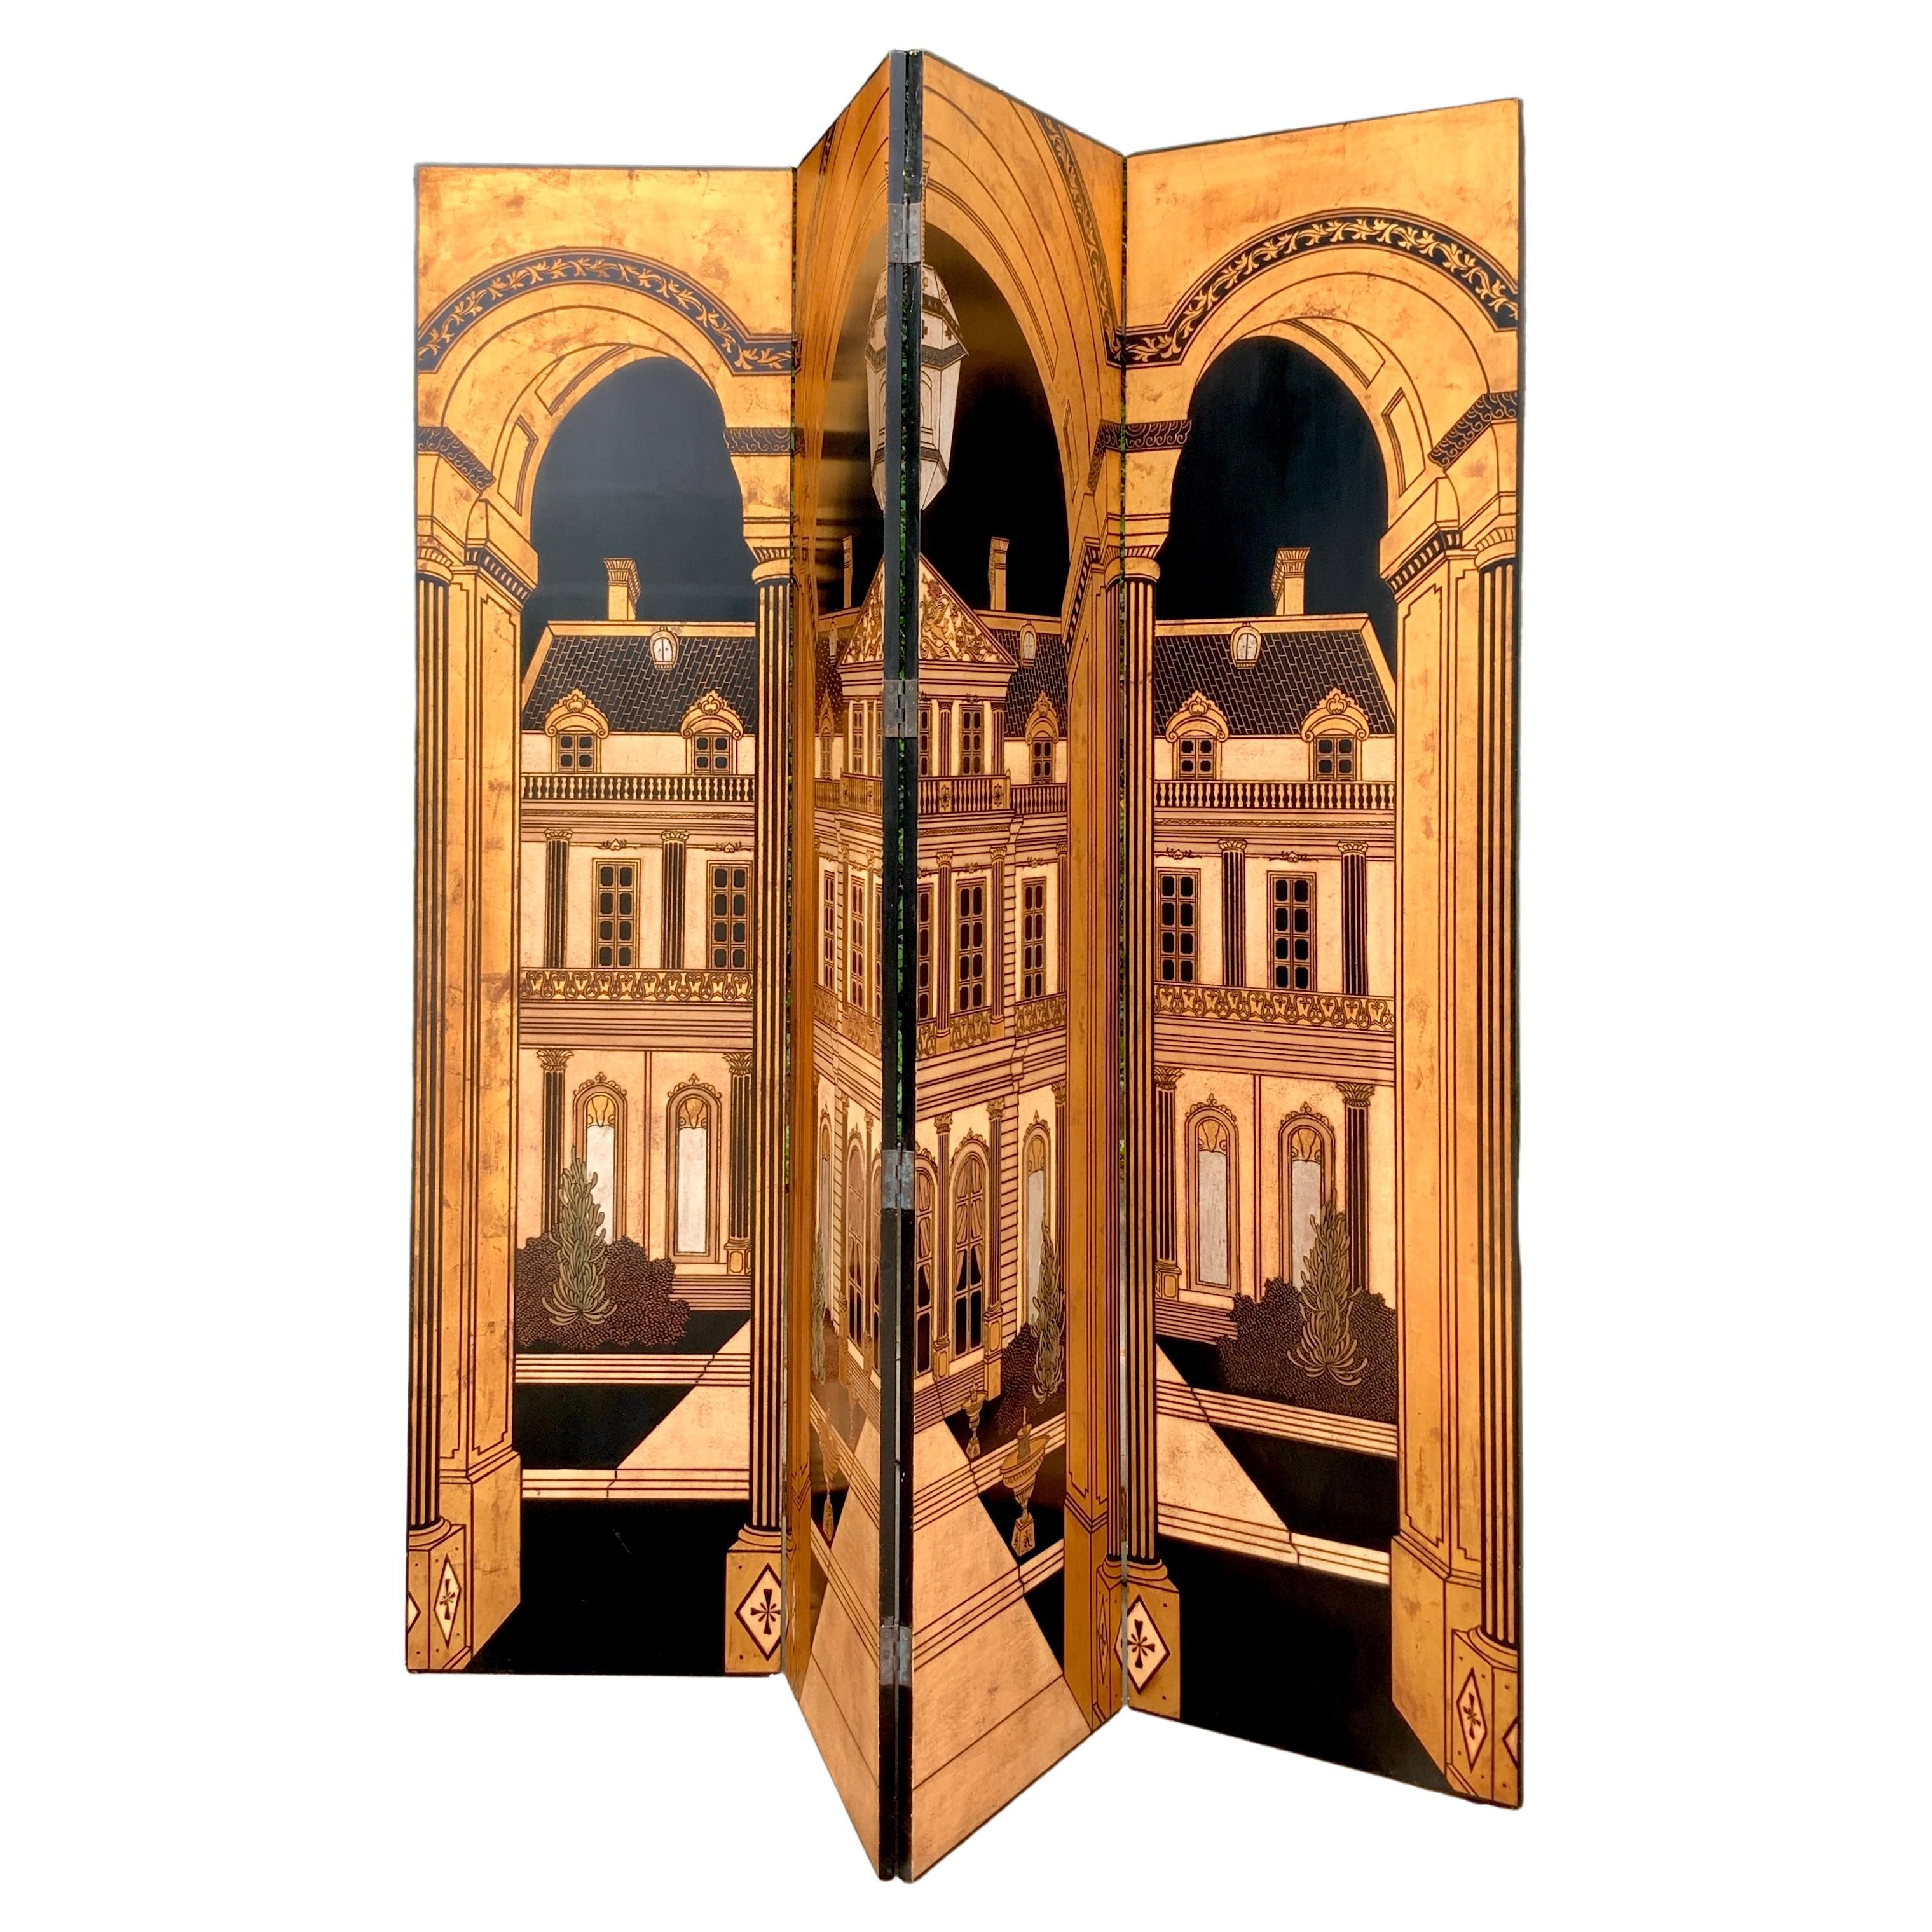 Hand-Crafted Large Art Deco Fournier Folding Screen Room Divider Paris